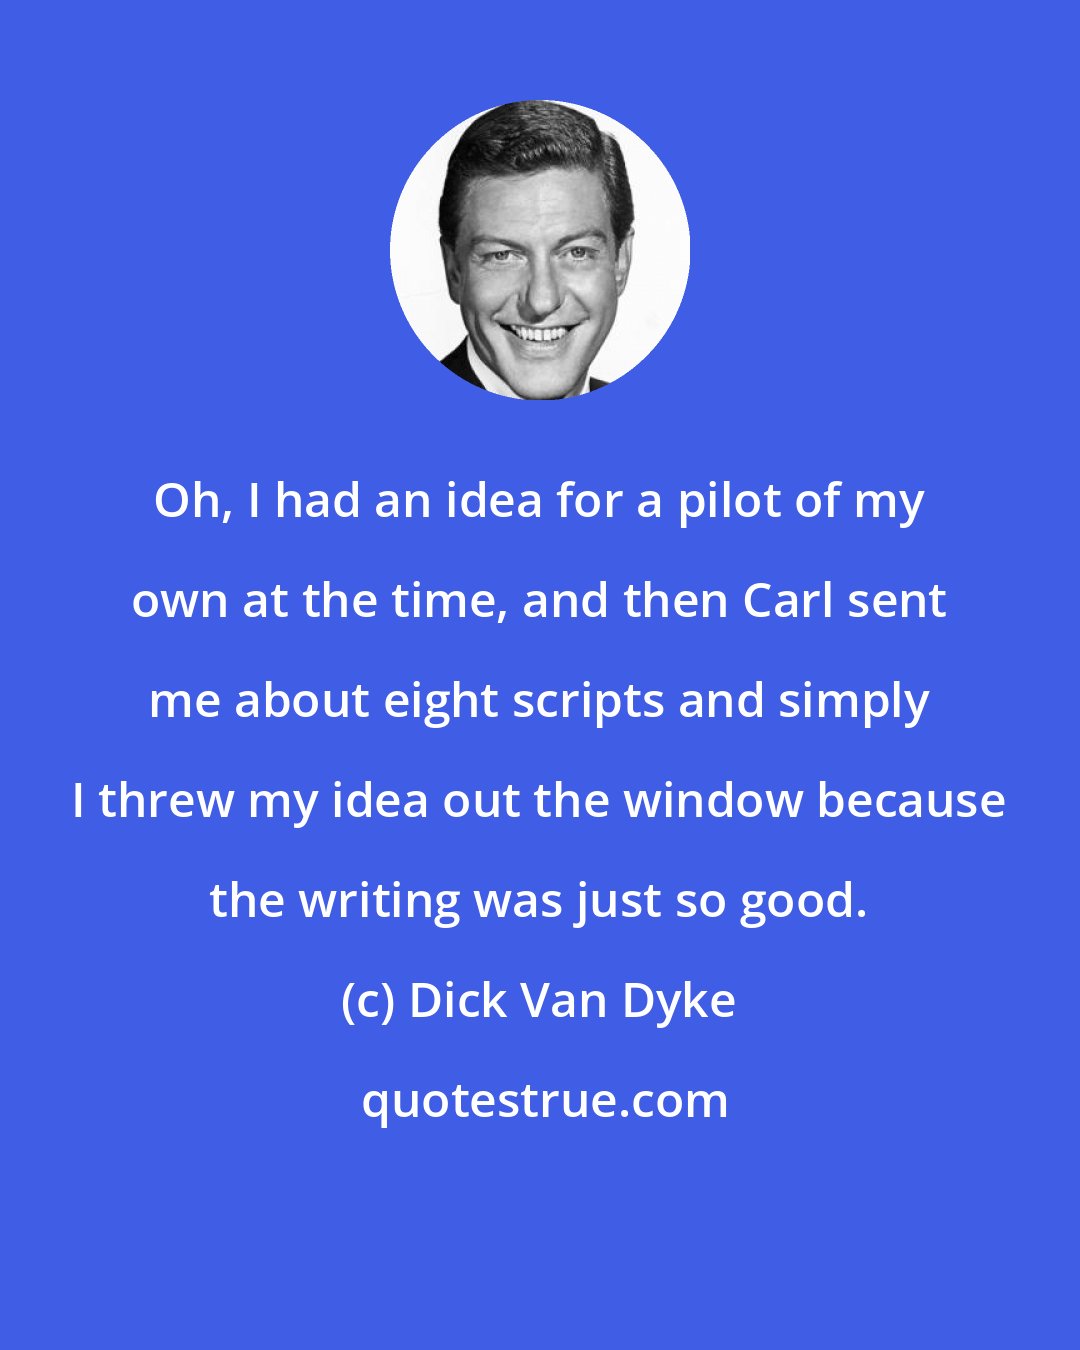 Dick Van Dyke: Oh, I had an idea for a pilot of my own at the time, and then Carl sent me about eight scripts and simply I threw my idea out the window because the writing was just so good.